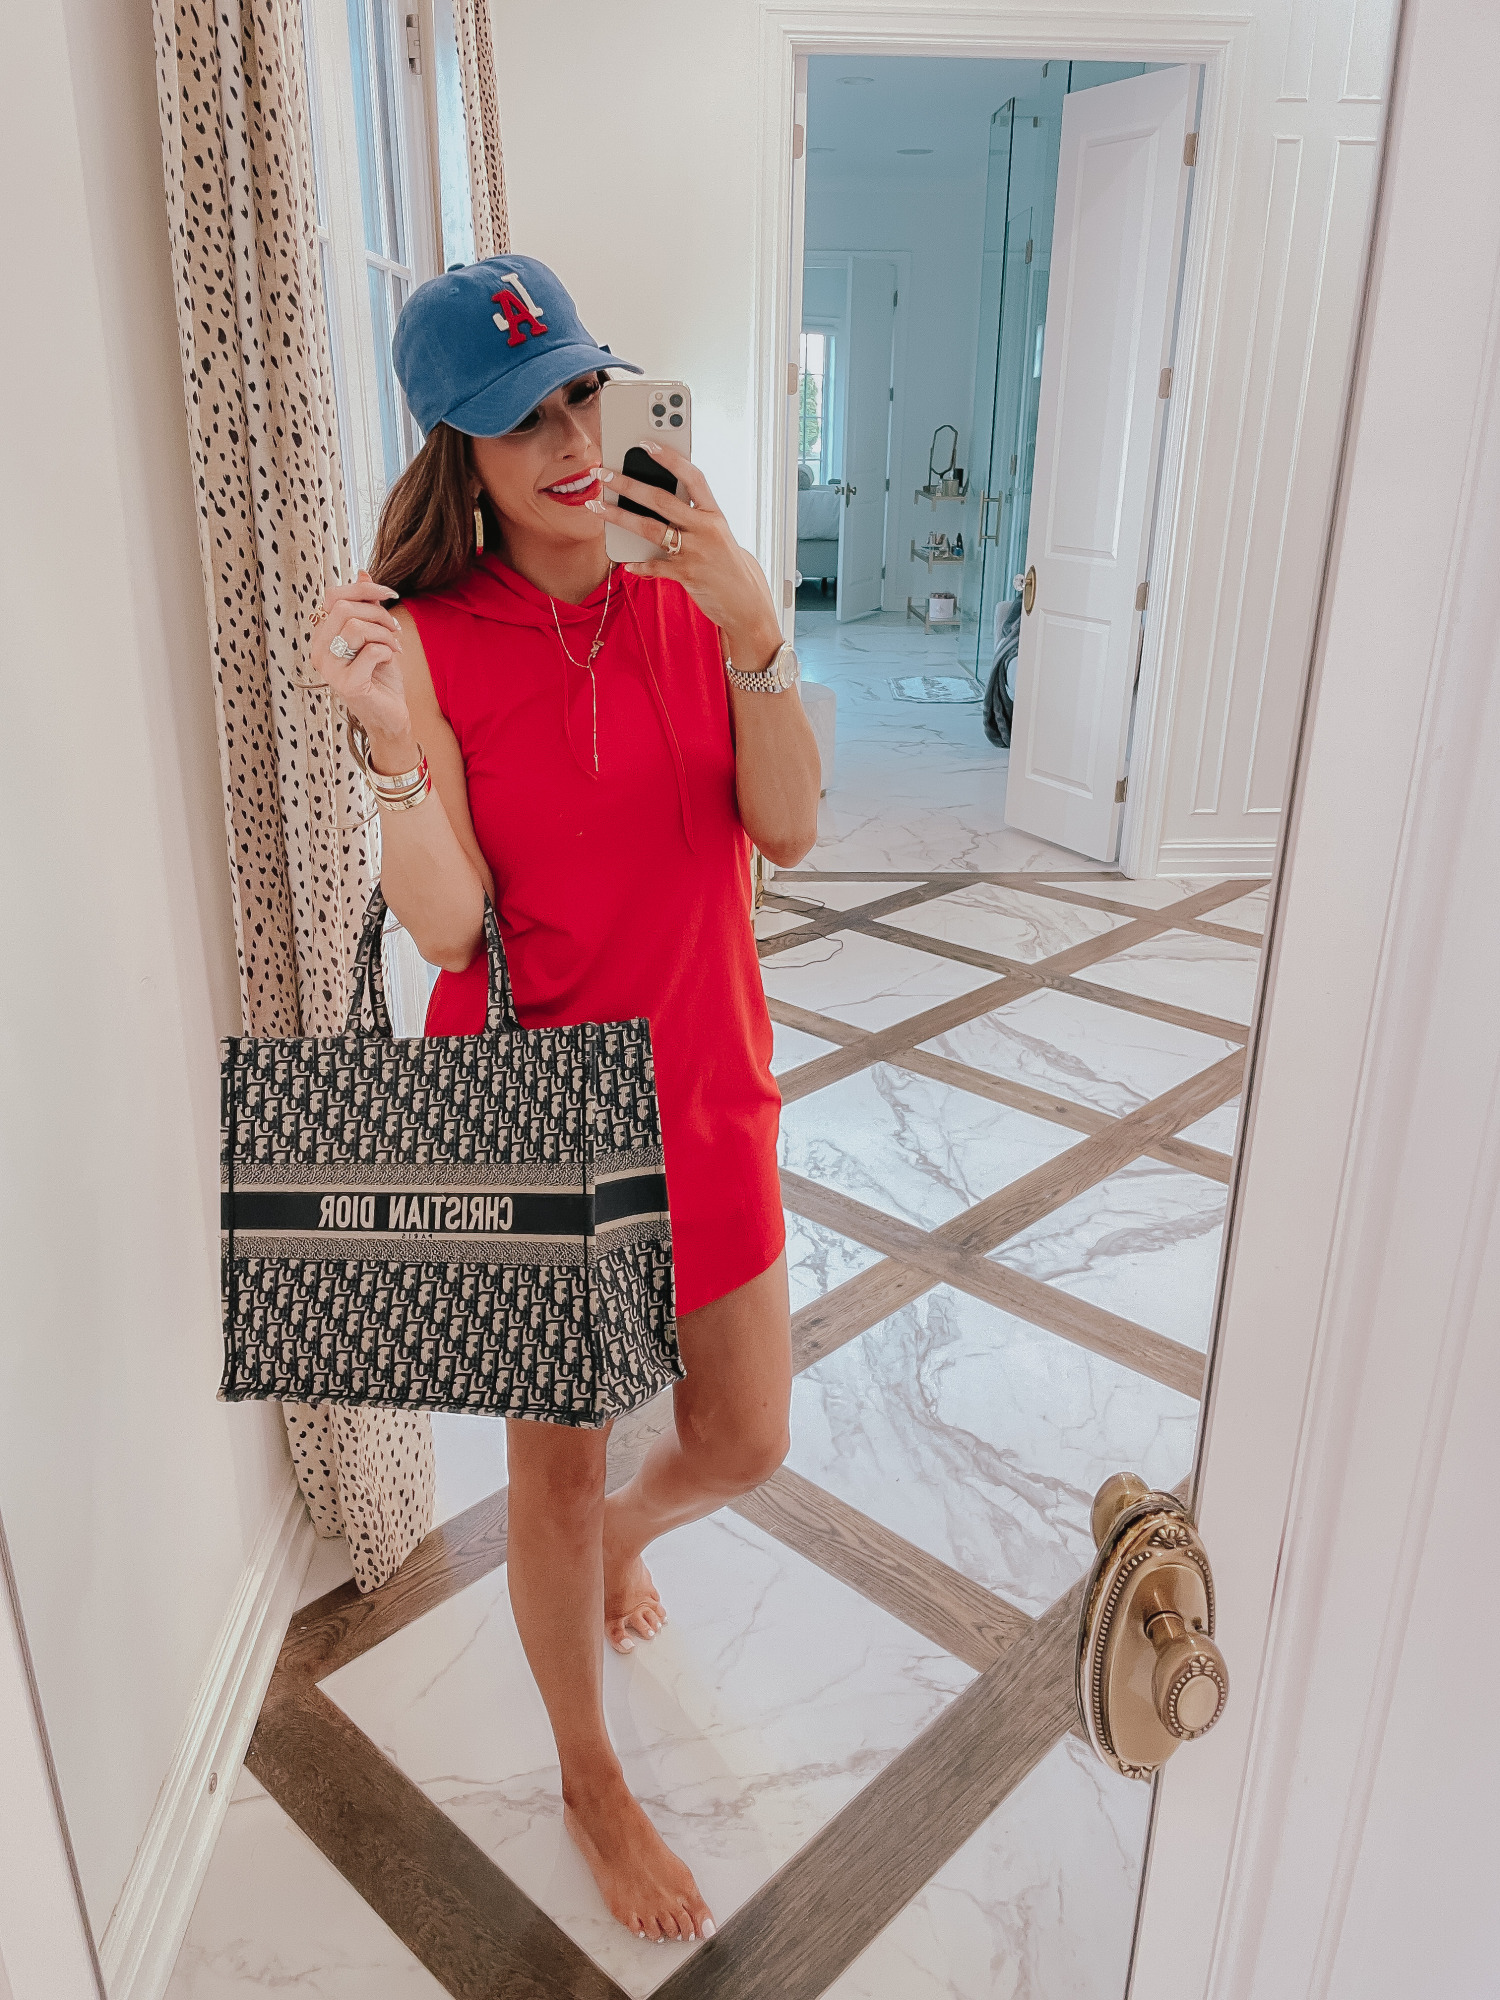 july 4 outfit inspiration 2021, pinterest july 4 outfit, gucci red lipstick, dior book tote navy, Emily gemma | June Instagram Recap by popular US fashion blog, The Sweetest Thing: image of Emily Gemma wearing a blue baseball cap, red sleeveless hoodie dress, and holding a Christian Dior tote bag. 